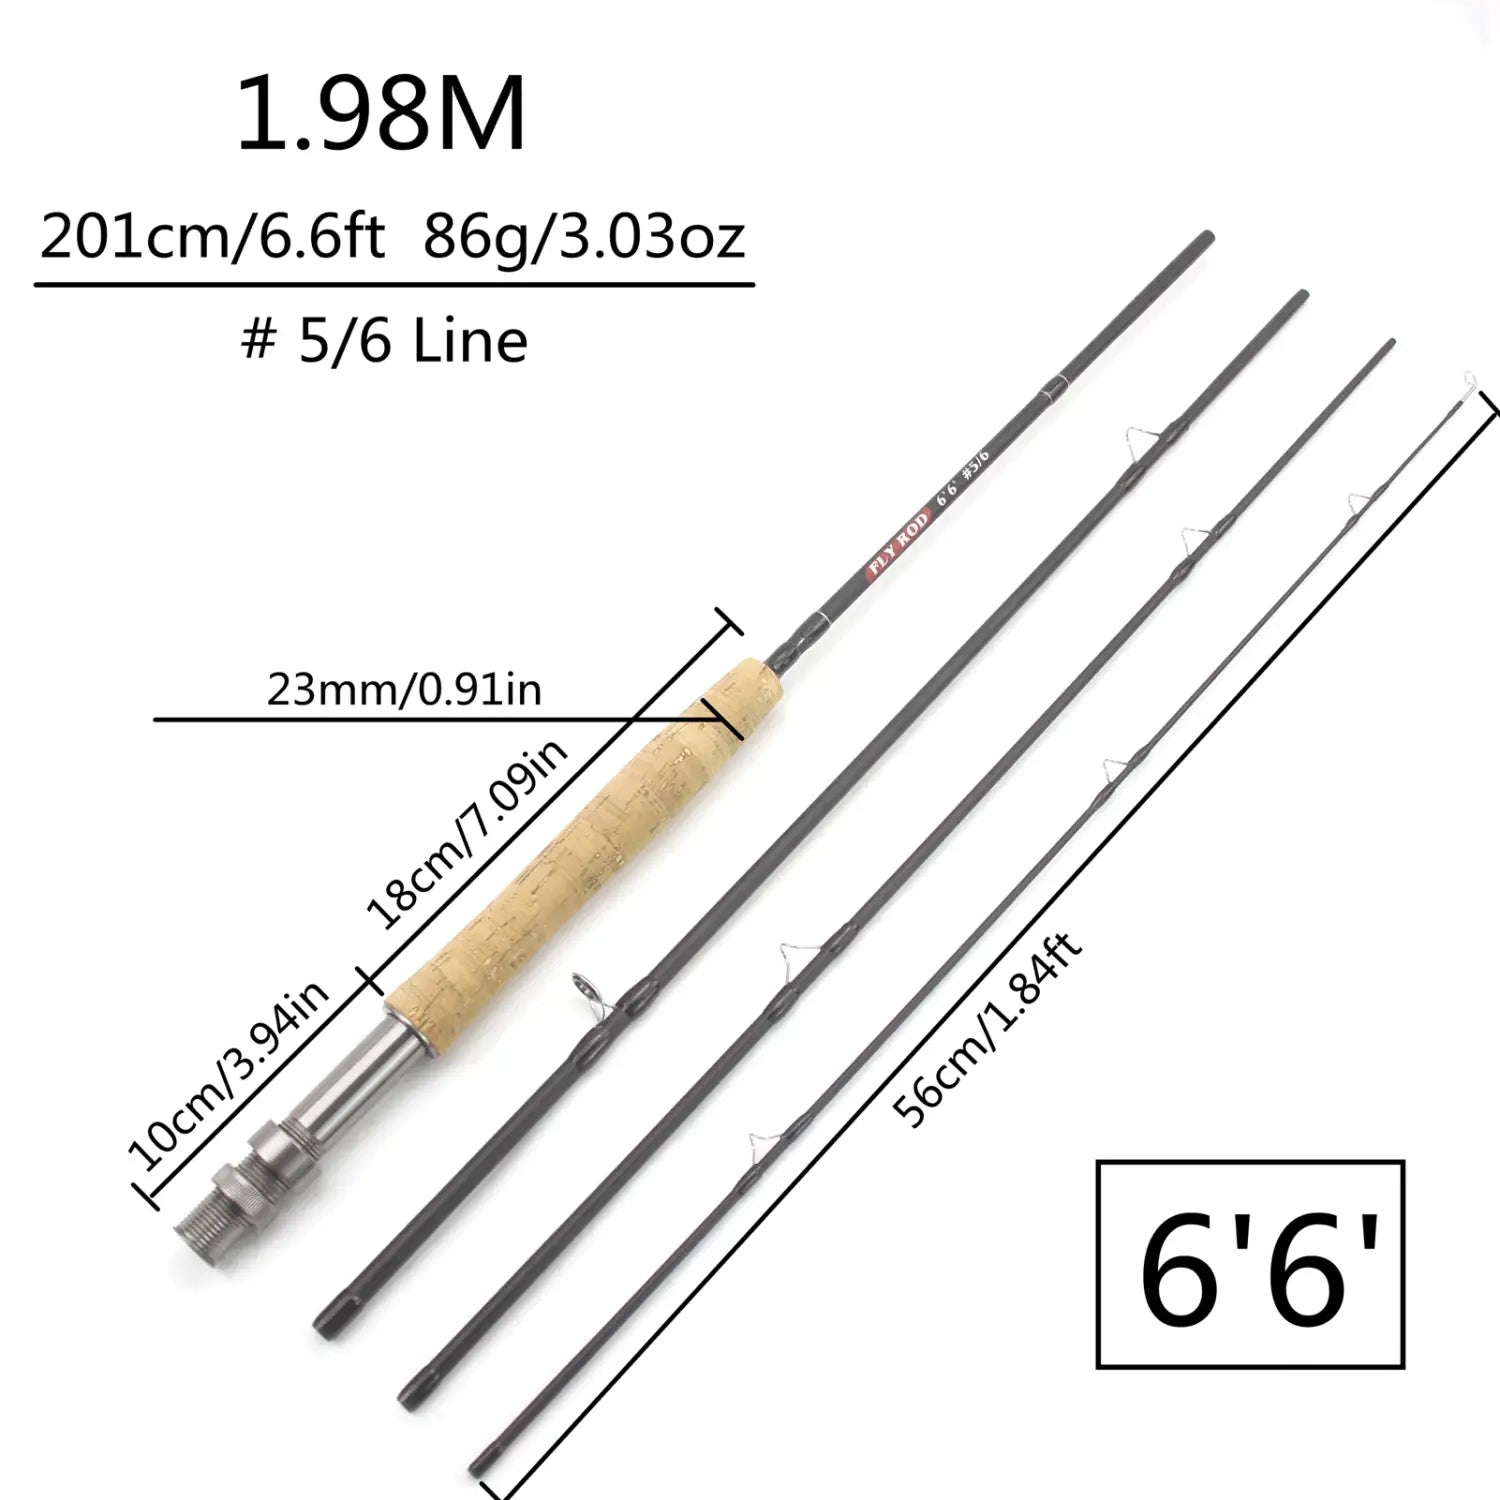 2.1M 7Ft Low Price Fly Fishing Rod Reel Combos Carbon 4 Section Light Beginner Tackle ROD FISH